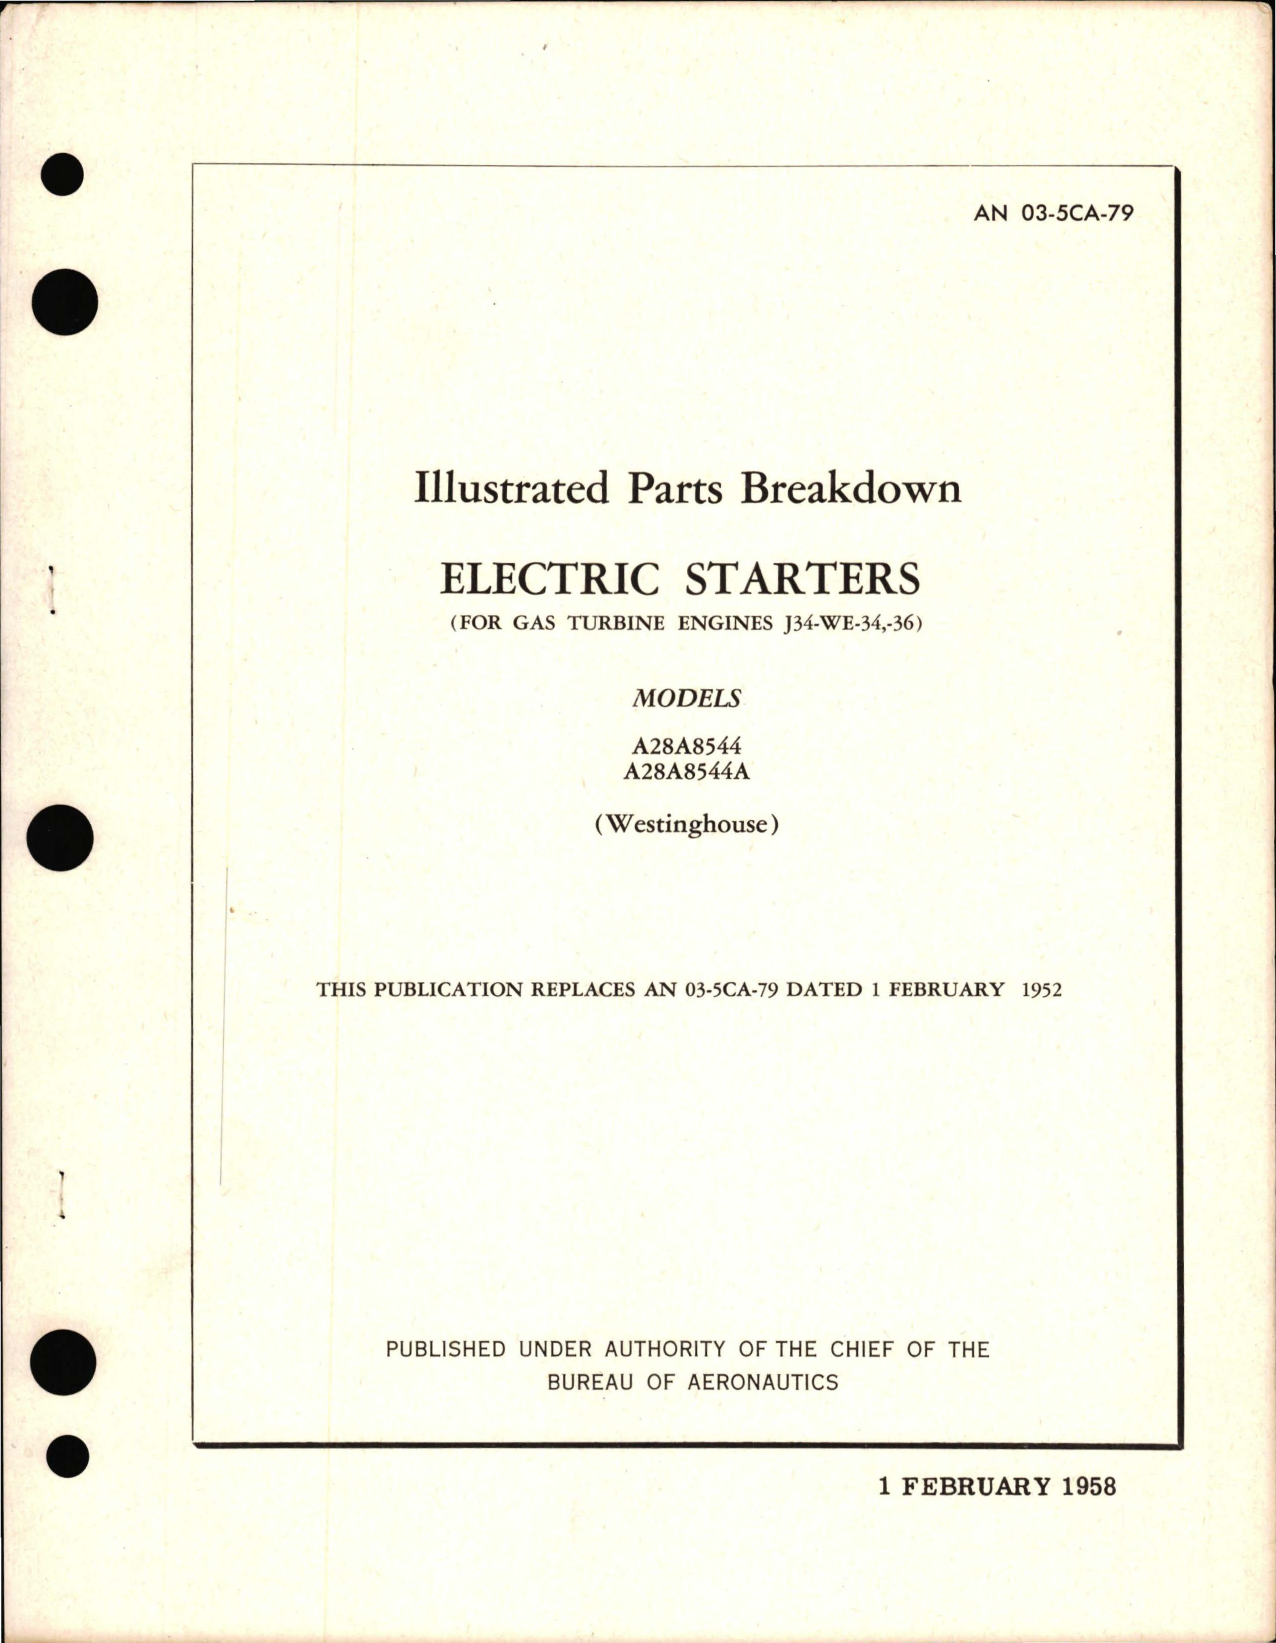 Sample page 1 from AirCorps Library document: Illustrated Parts Breakdown for Electric Starters Models A28A8544 and A28A8544A 